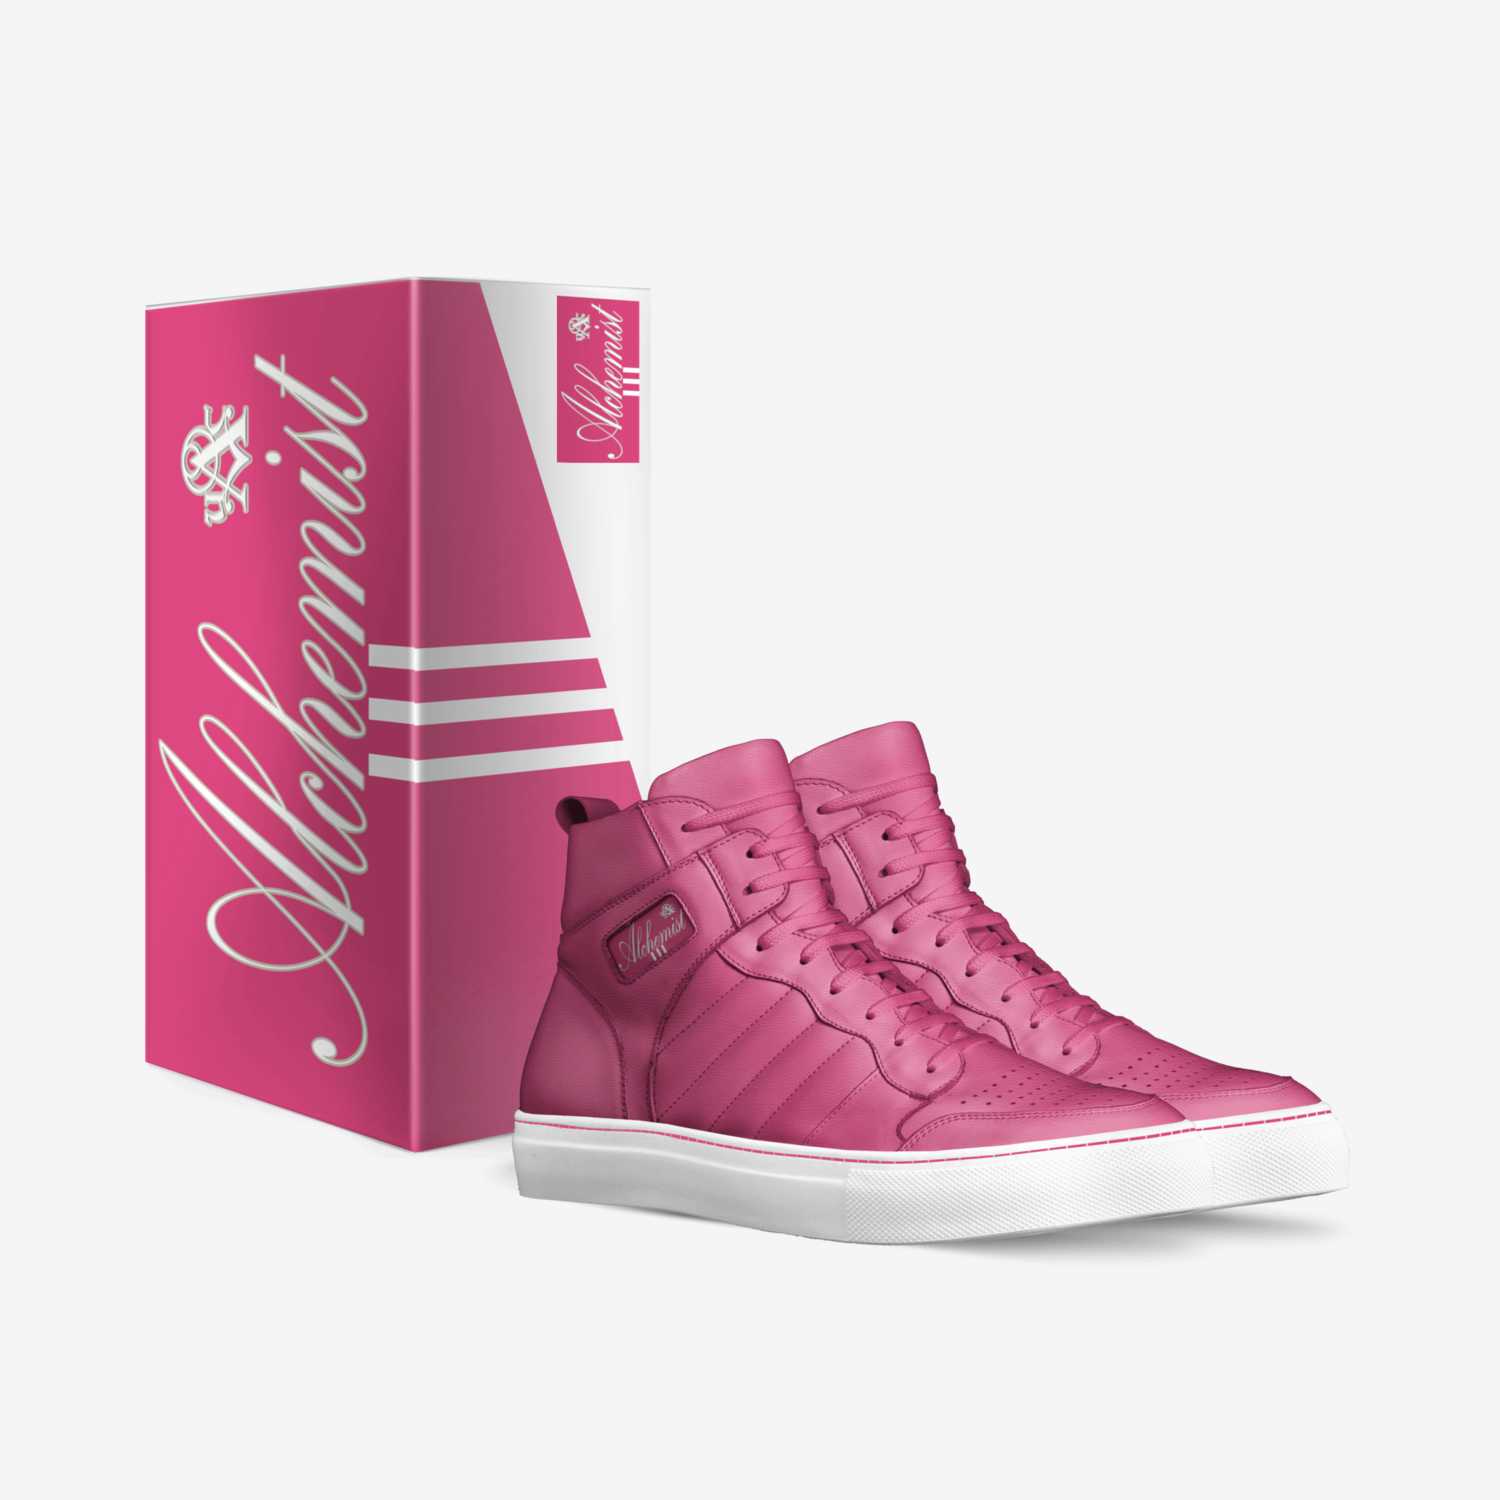 Pink Print 2 custom made in Italy shoes by Urban Alchemist Clothing | Box view